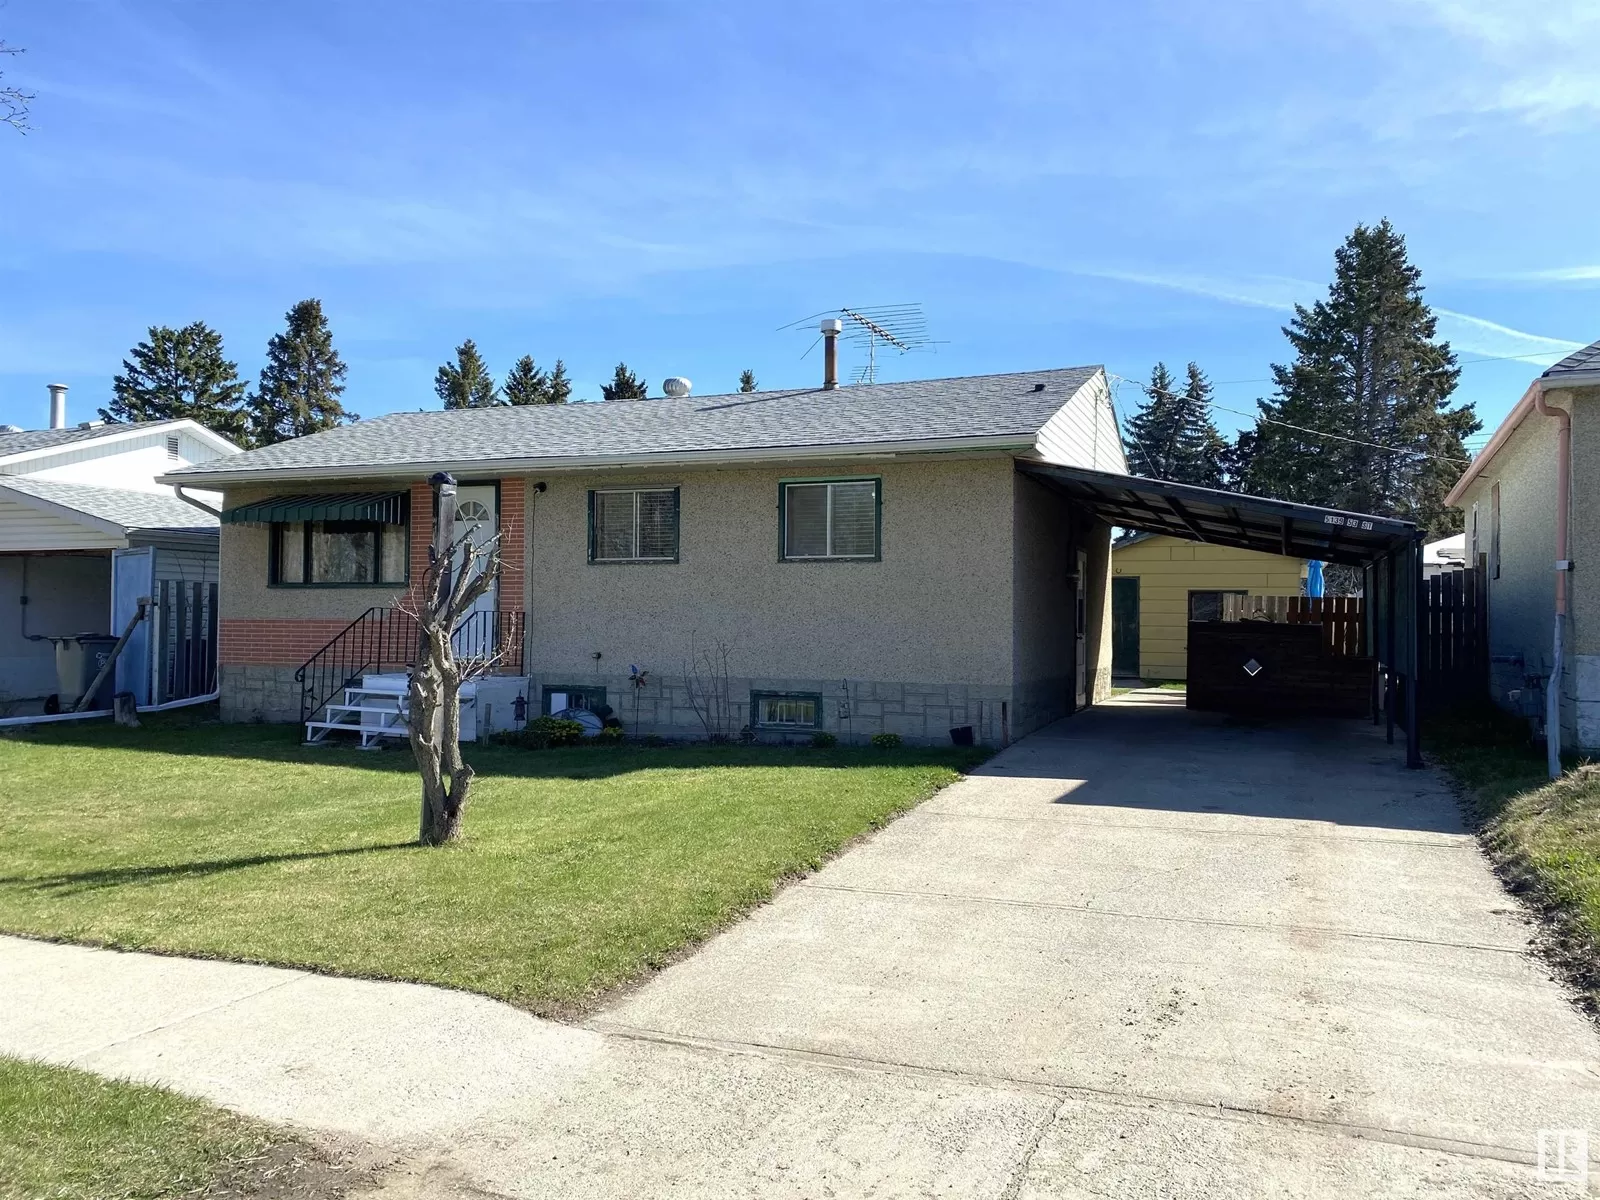 House for rent: 5139 53 St, Warburg, Alberta T0C 2T0